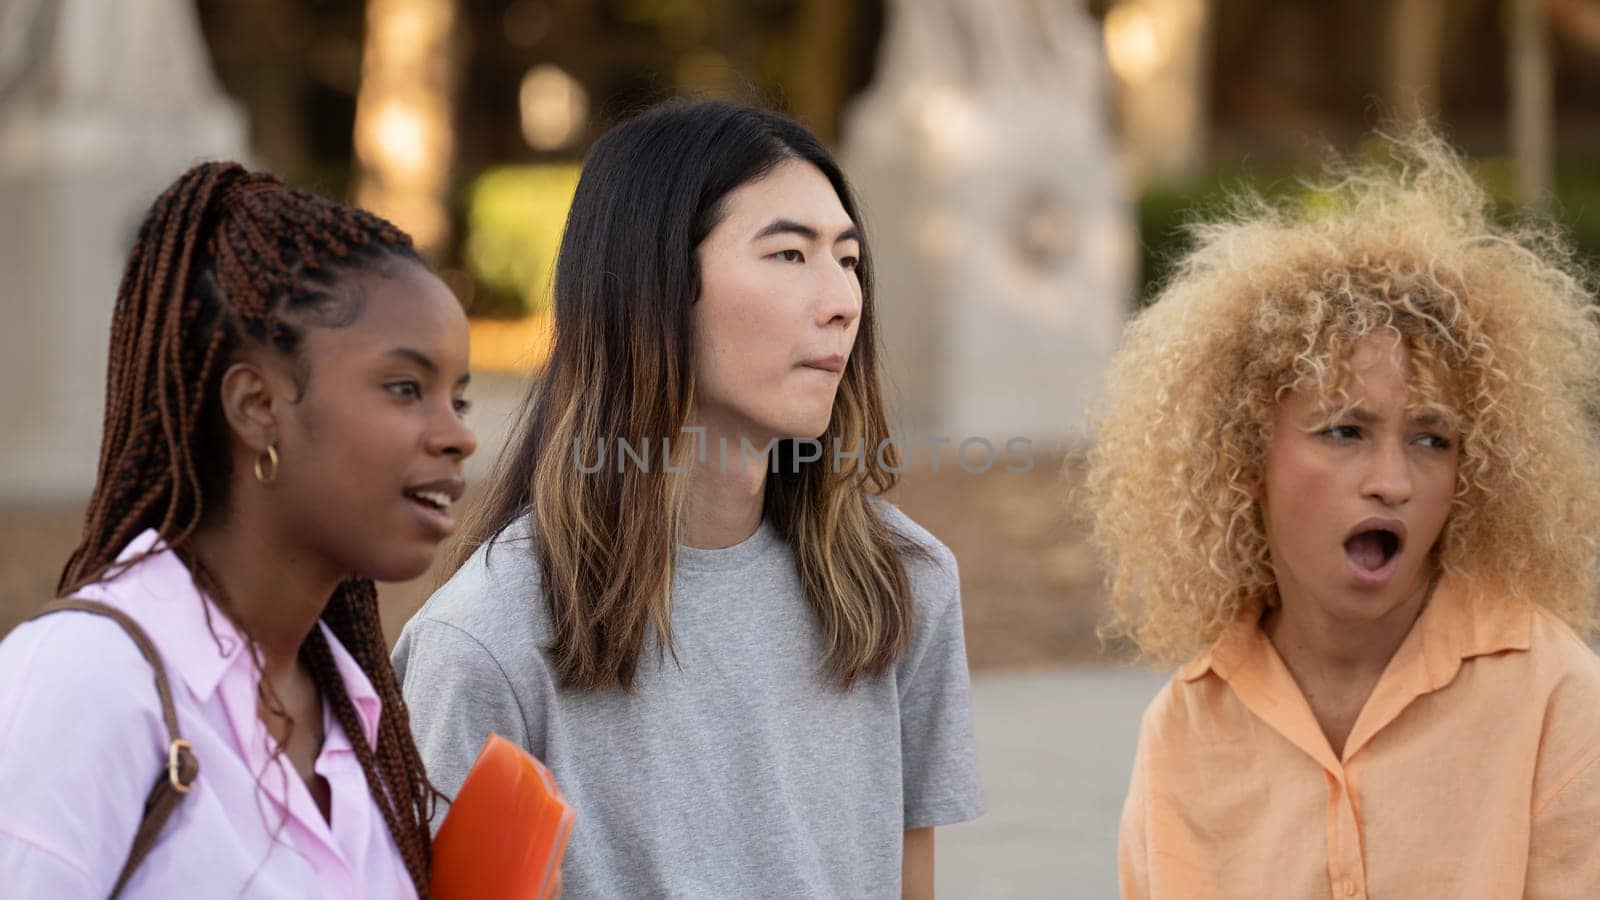 Multi ethnic Students looking away with expression of surprise in the face standing on a campus.